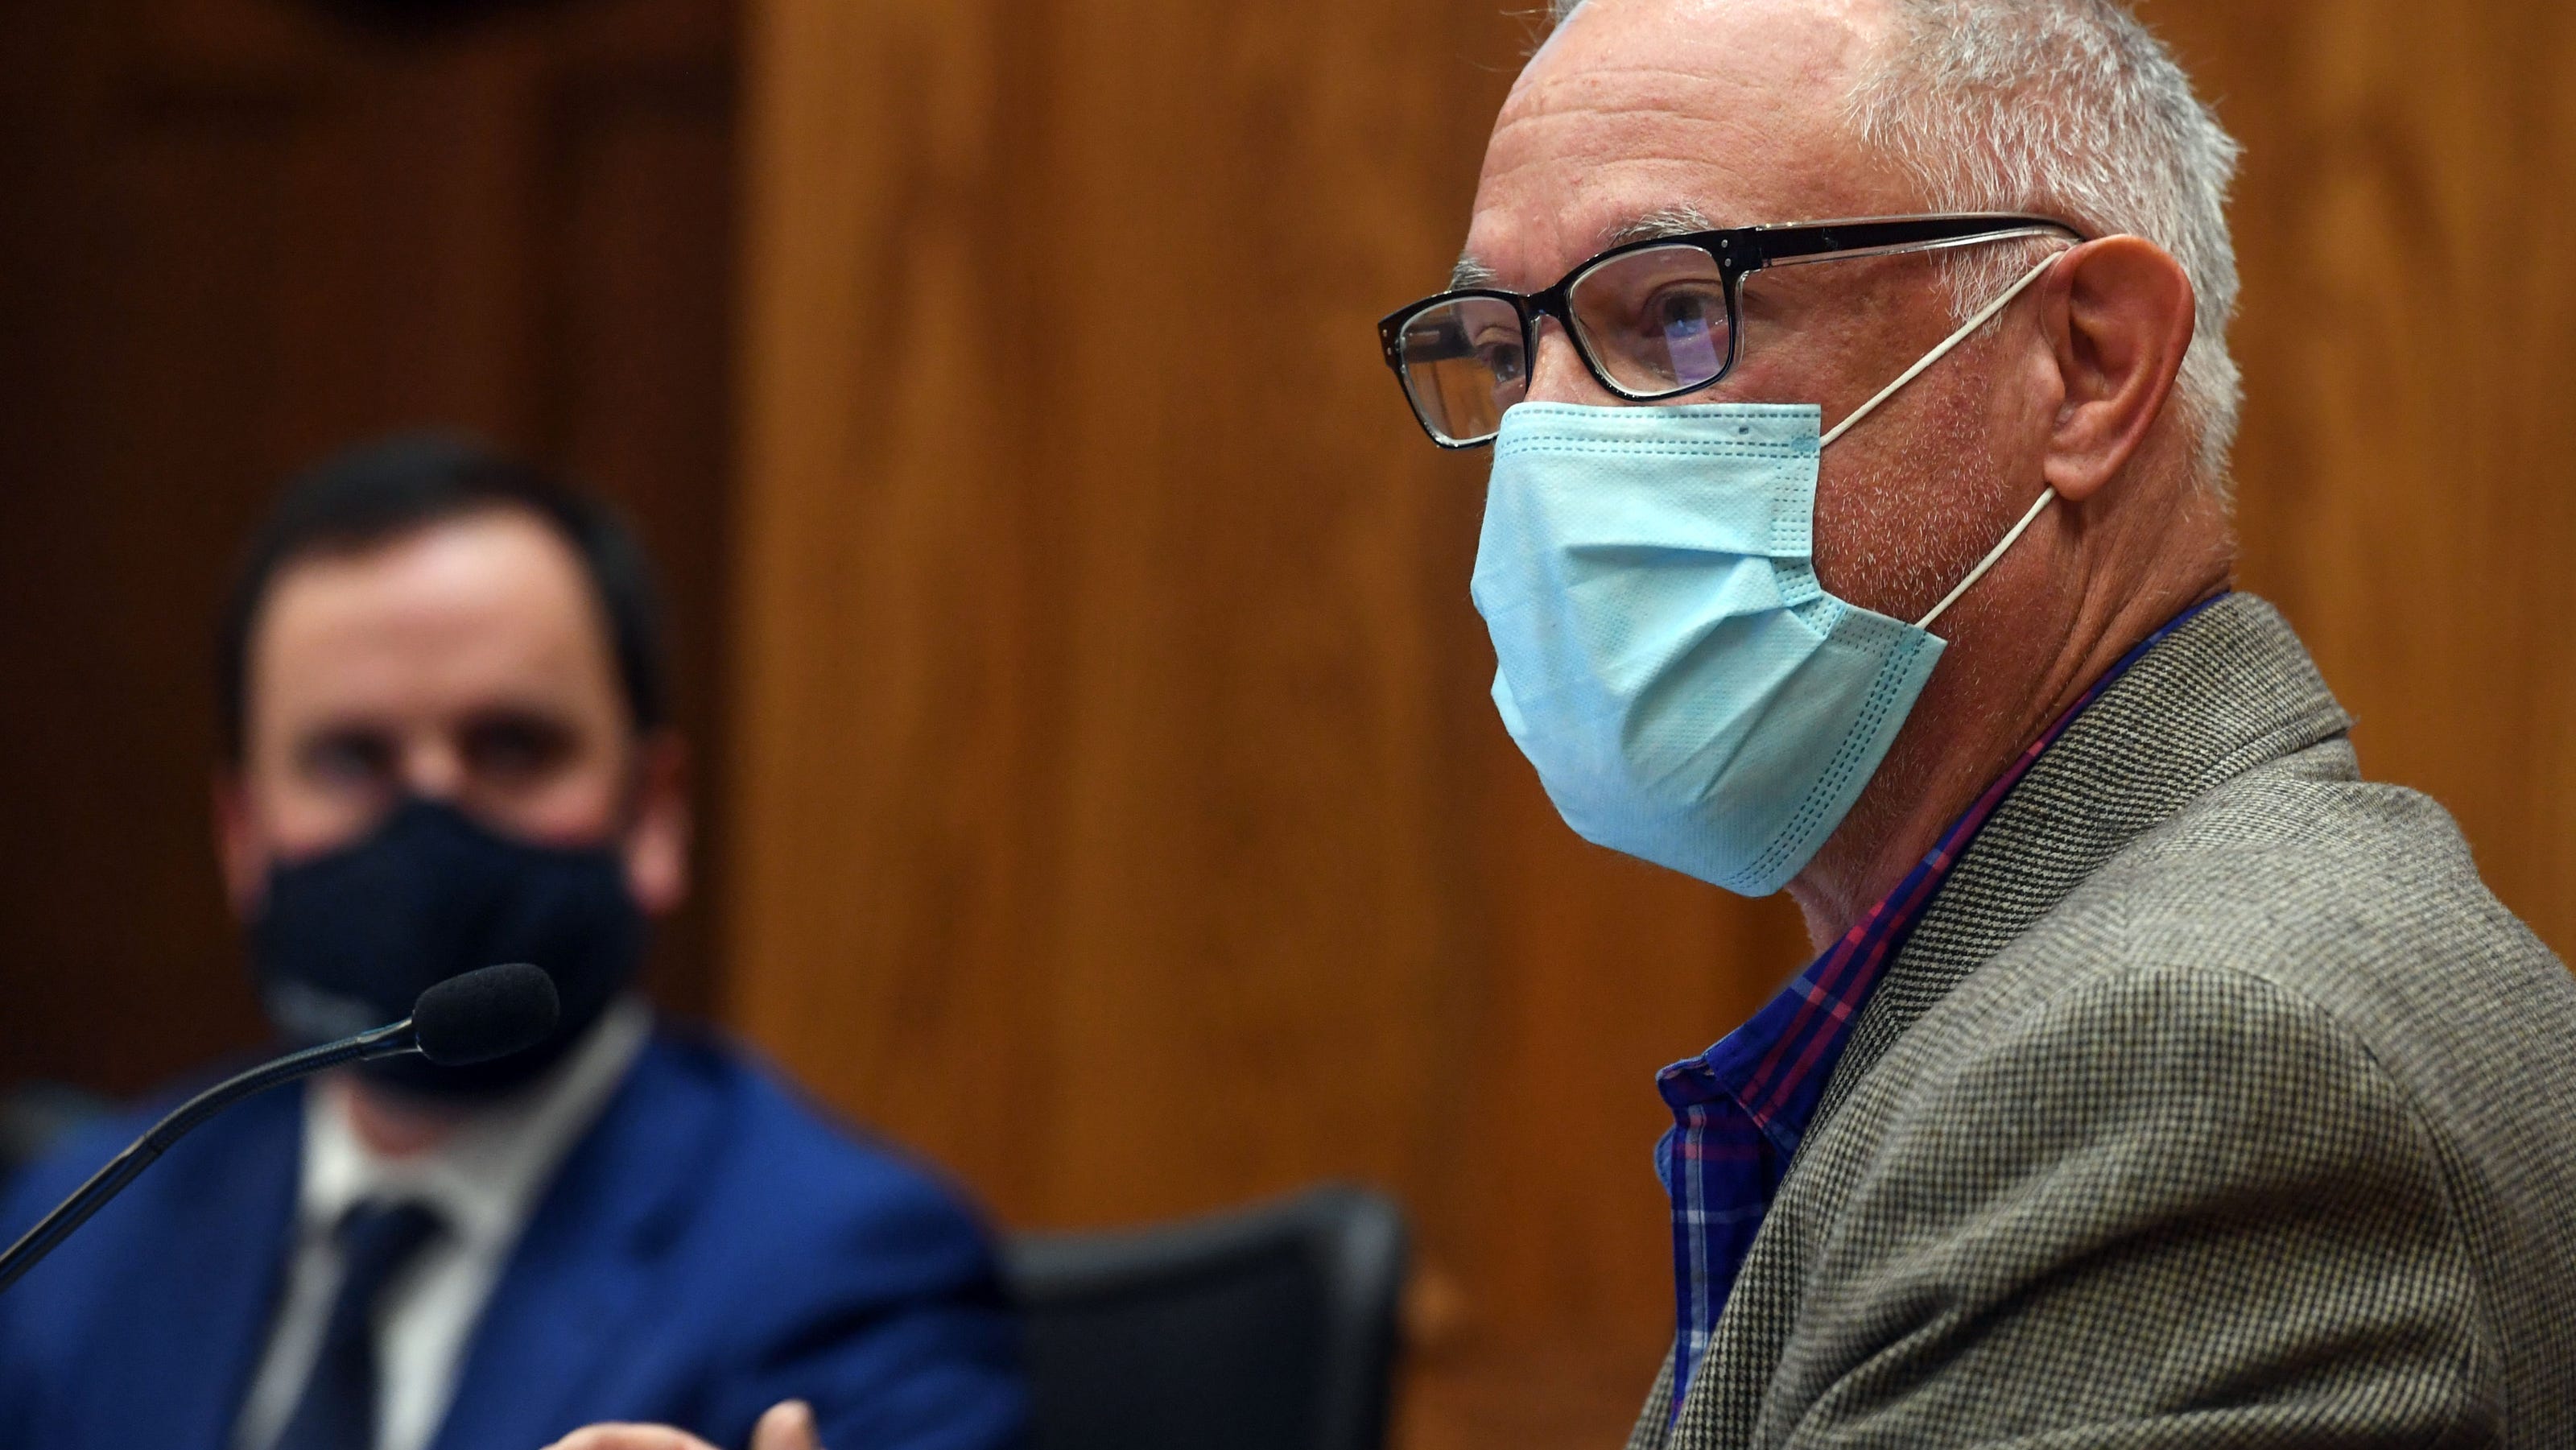 A mask mandate is back on the City Council agenda. Here's why it'll likely pass.